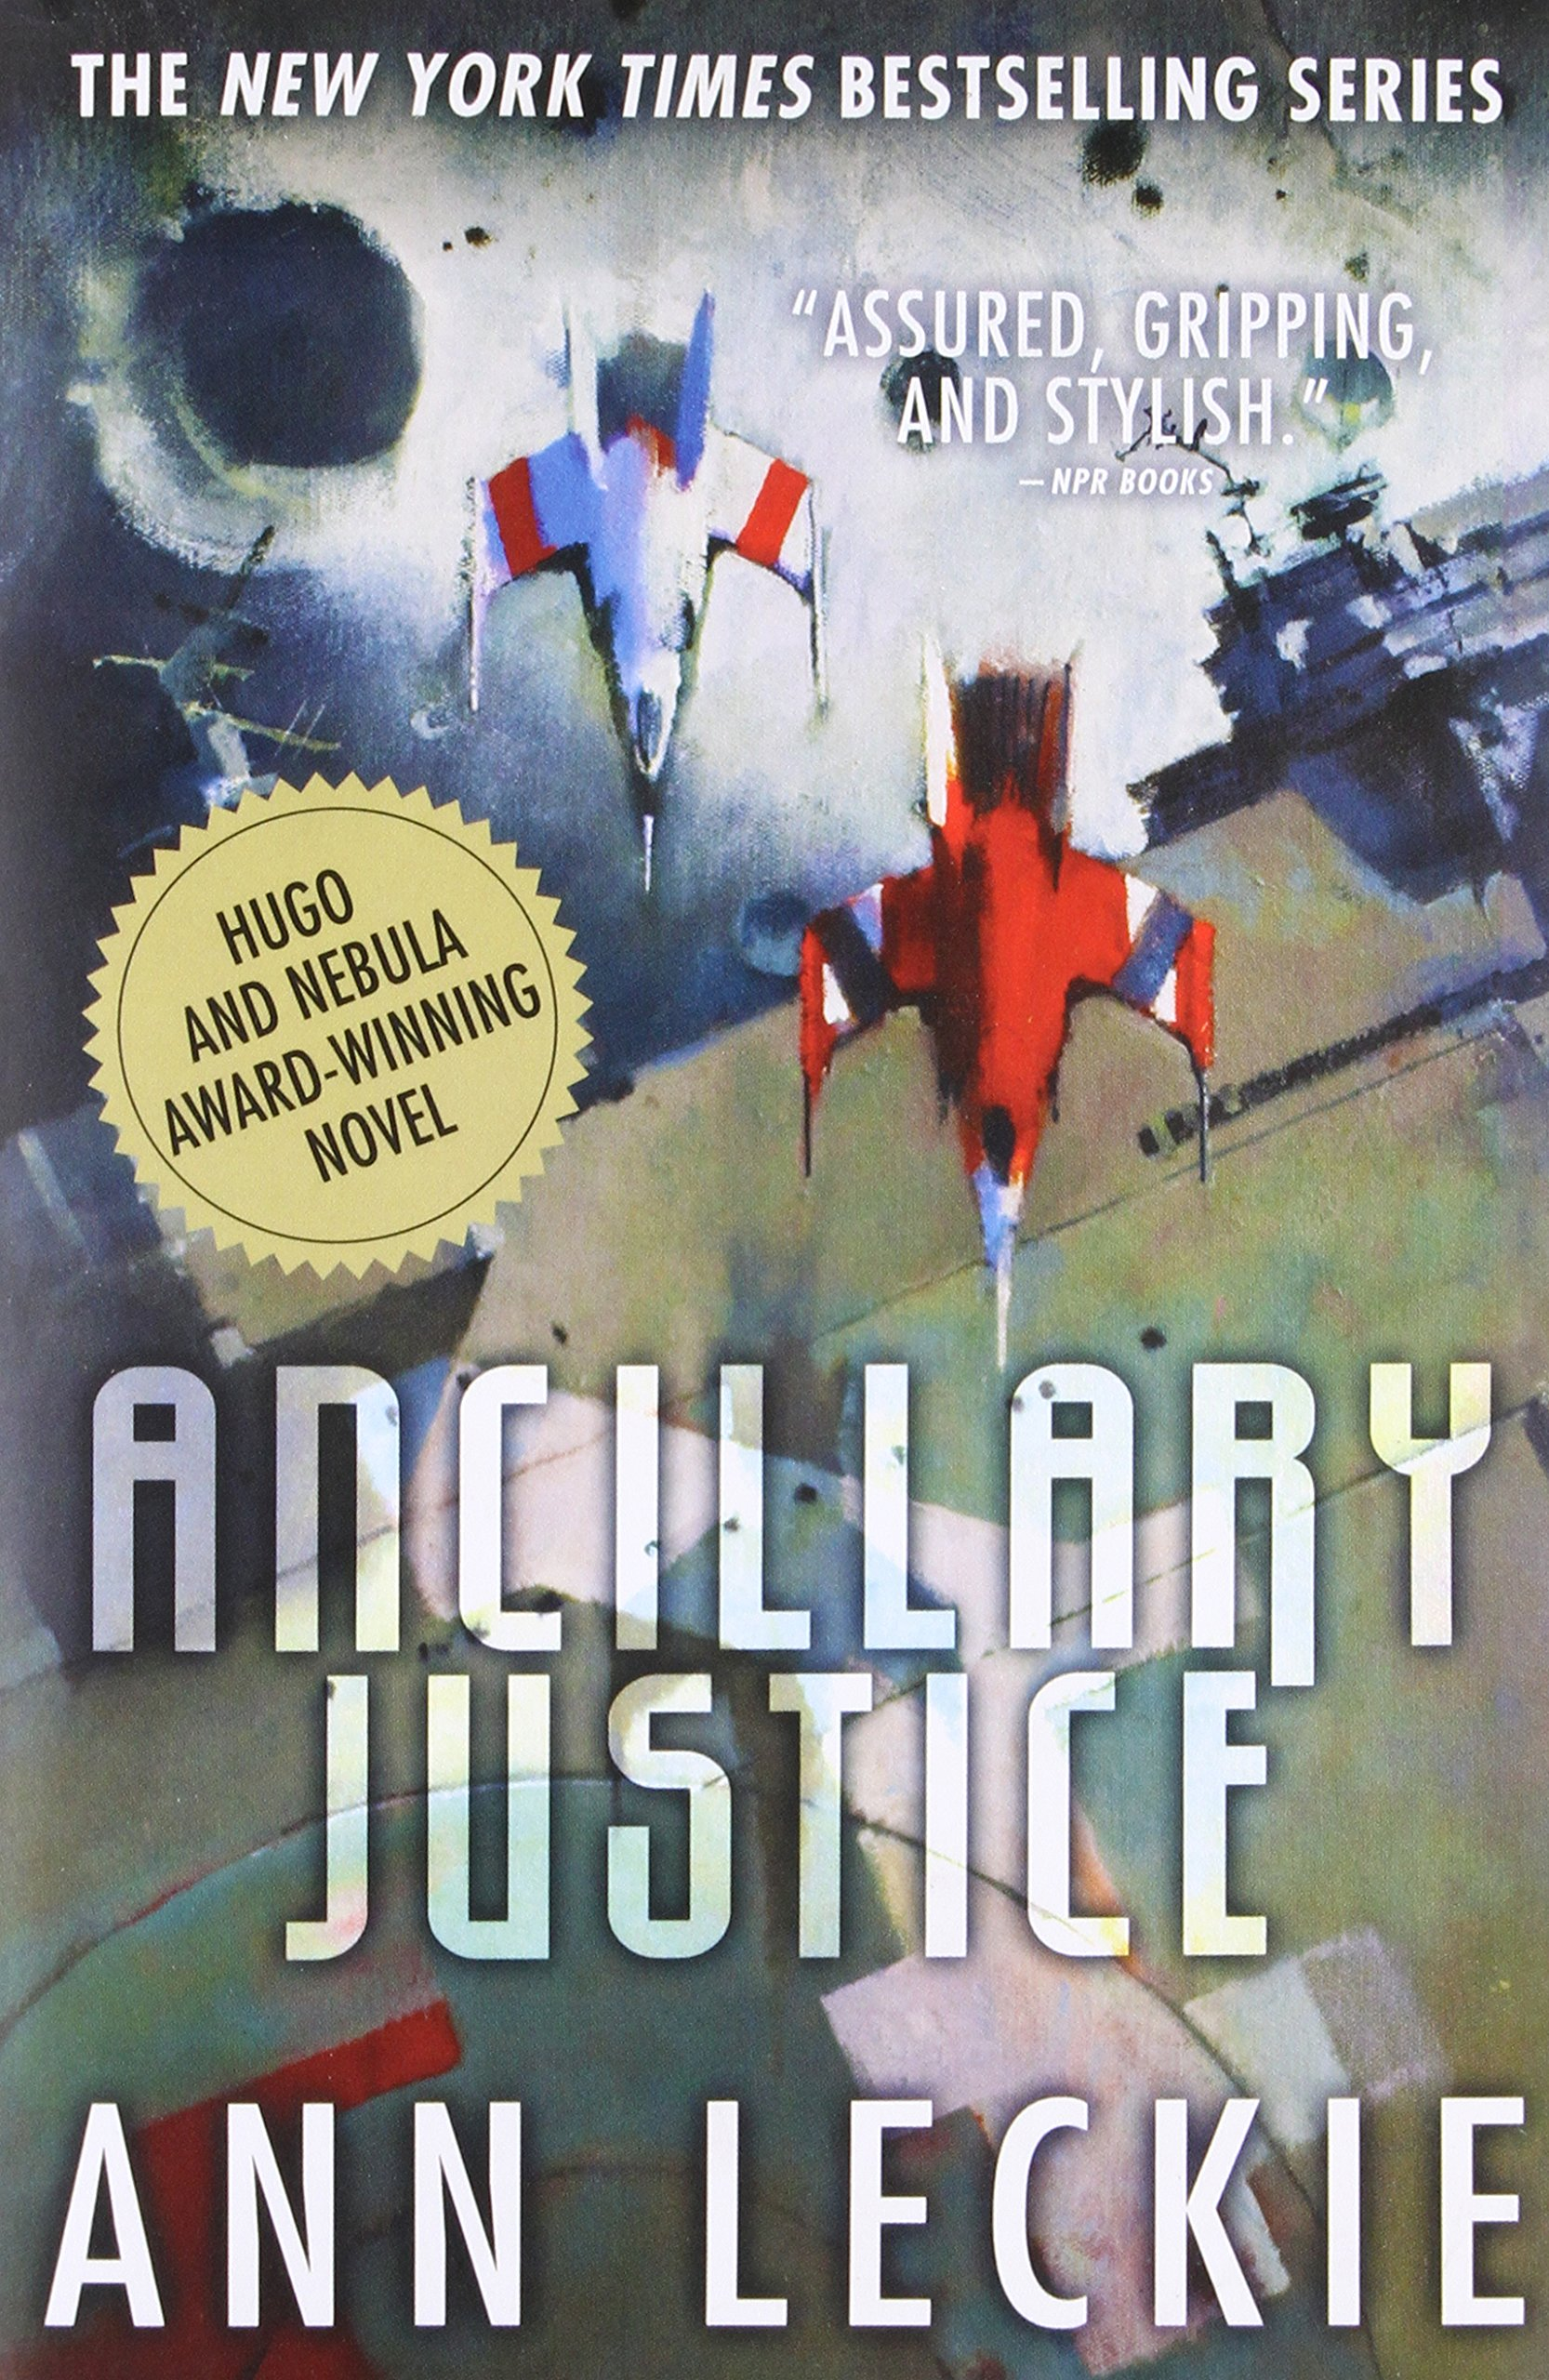 Cover image of book Ancillary Justice by Ann Leckie